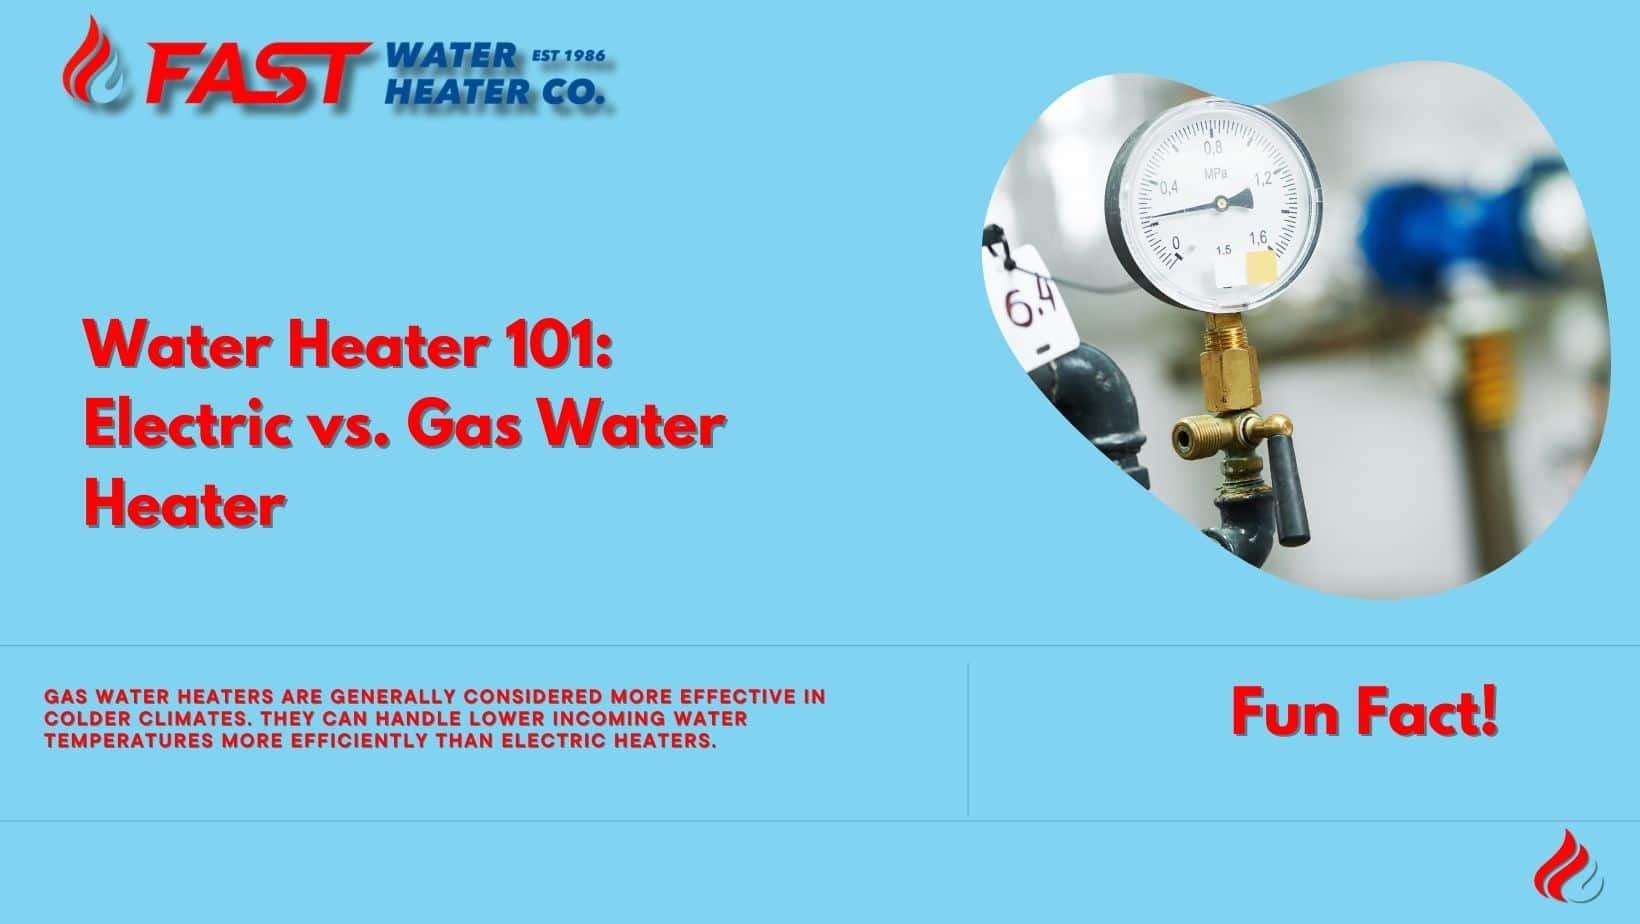 Water Heater 101: Electric vs. Gas Water Heater